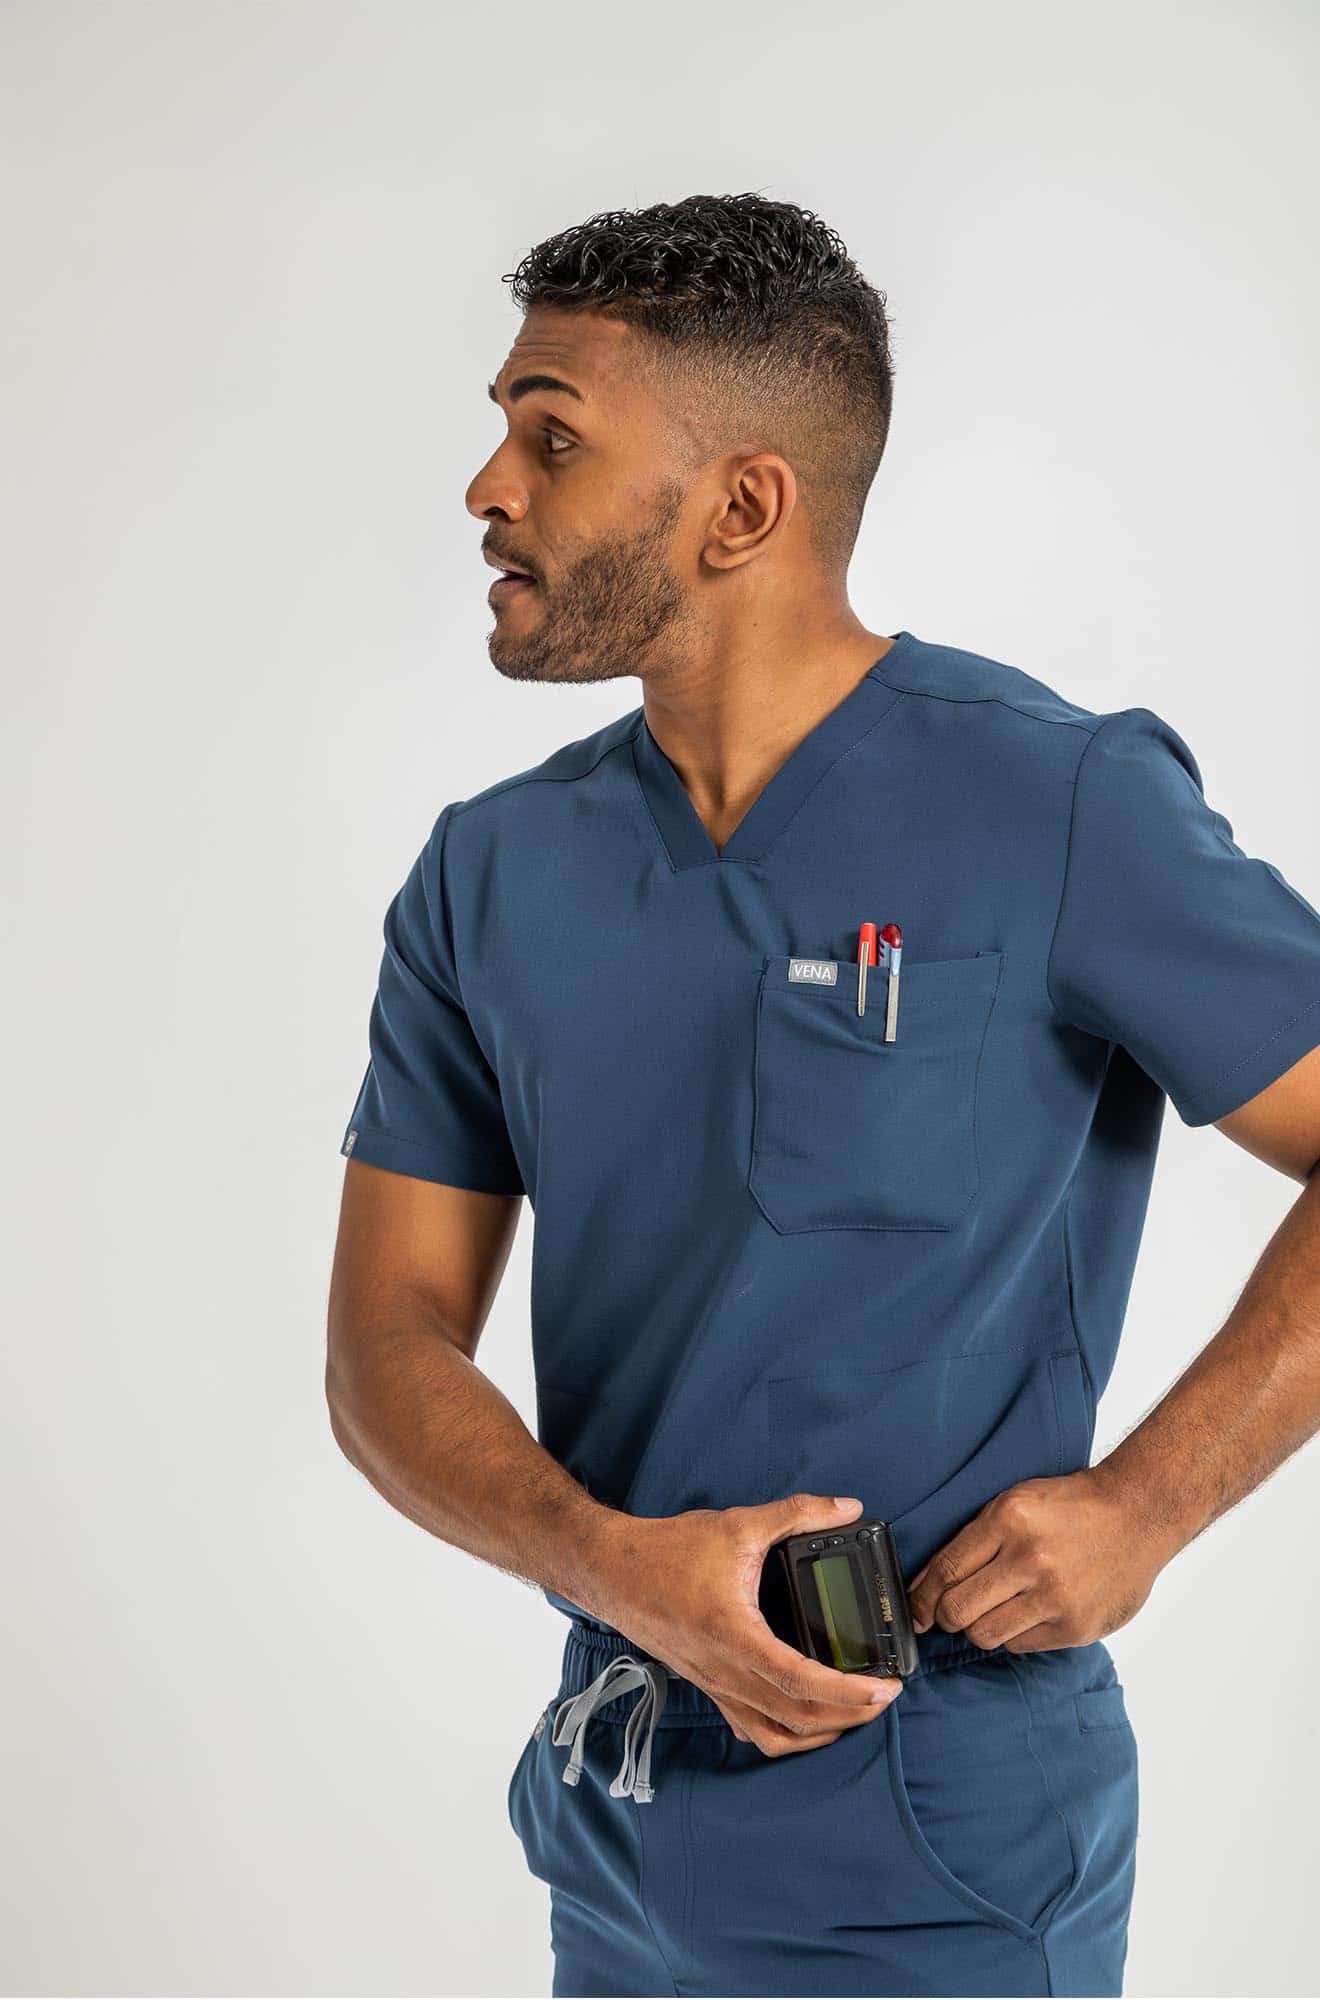 VENA mens jogger style scrub shirts man putting the beeper on his side waist#colour_navy-blue